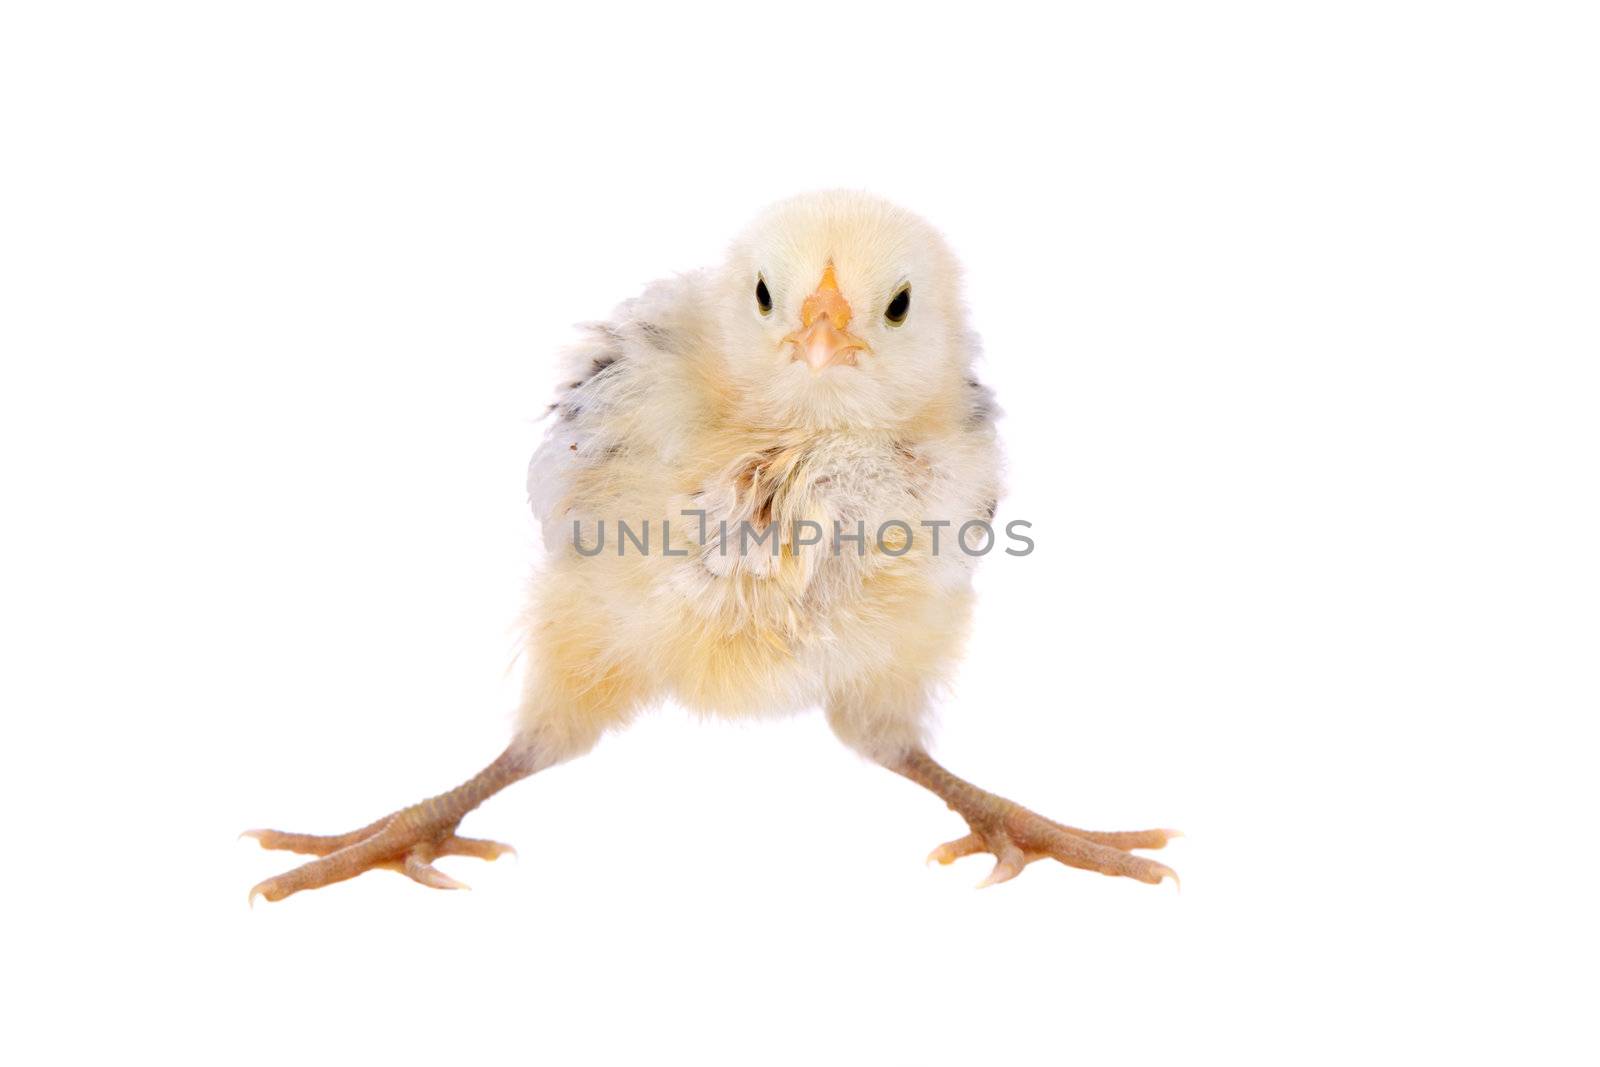 Cute little baby chick about to lose it's balance